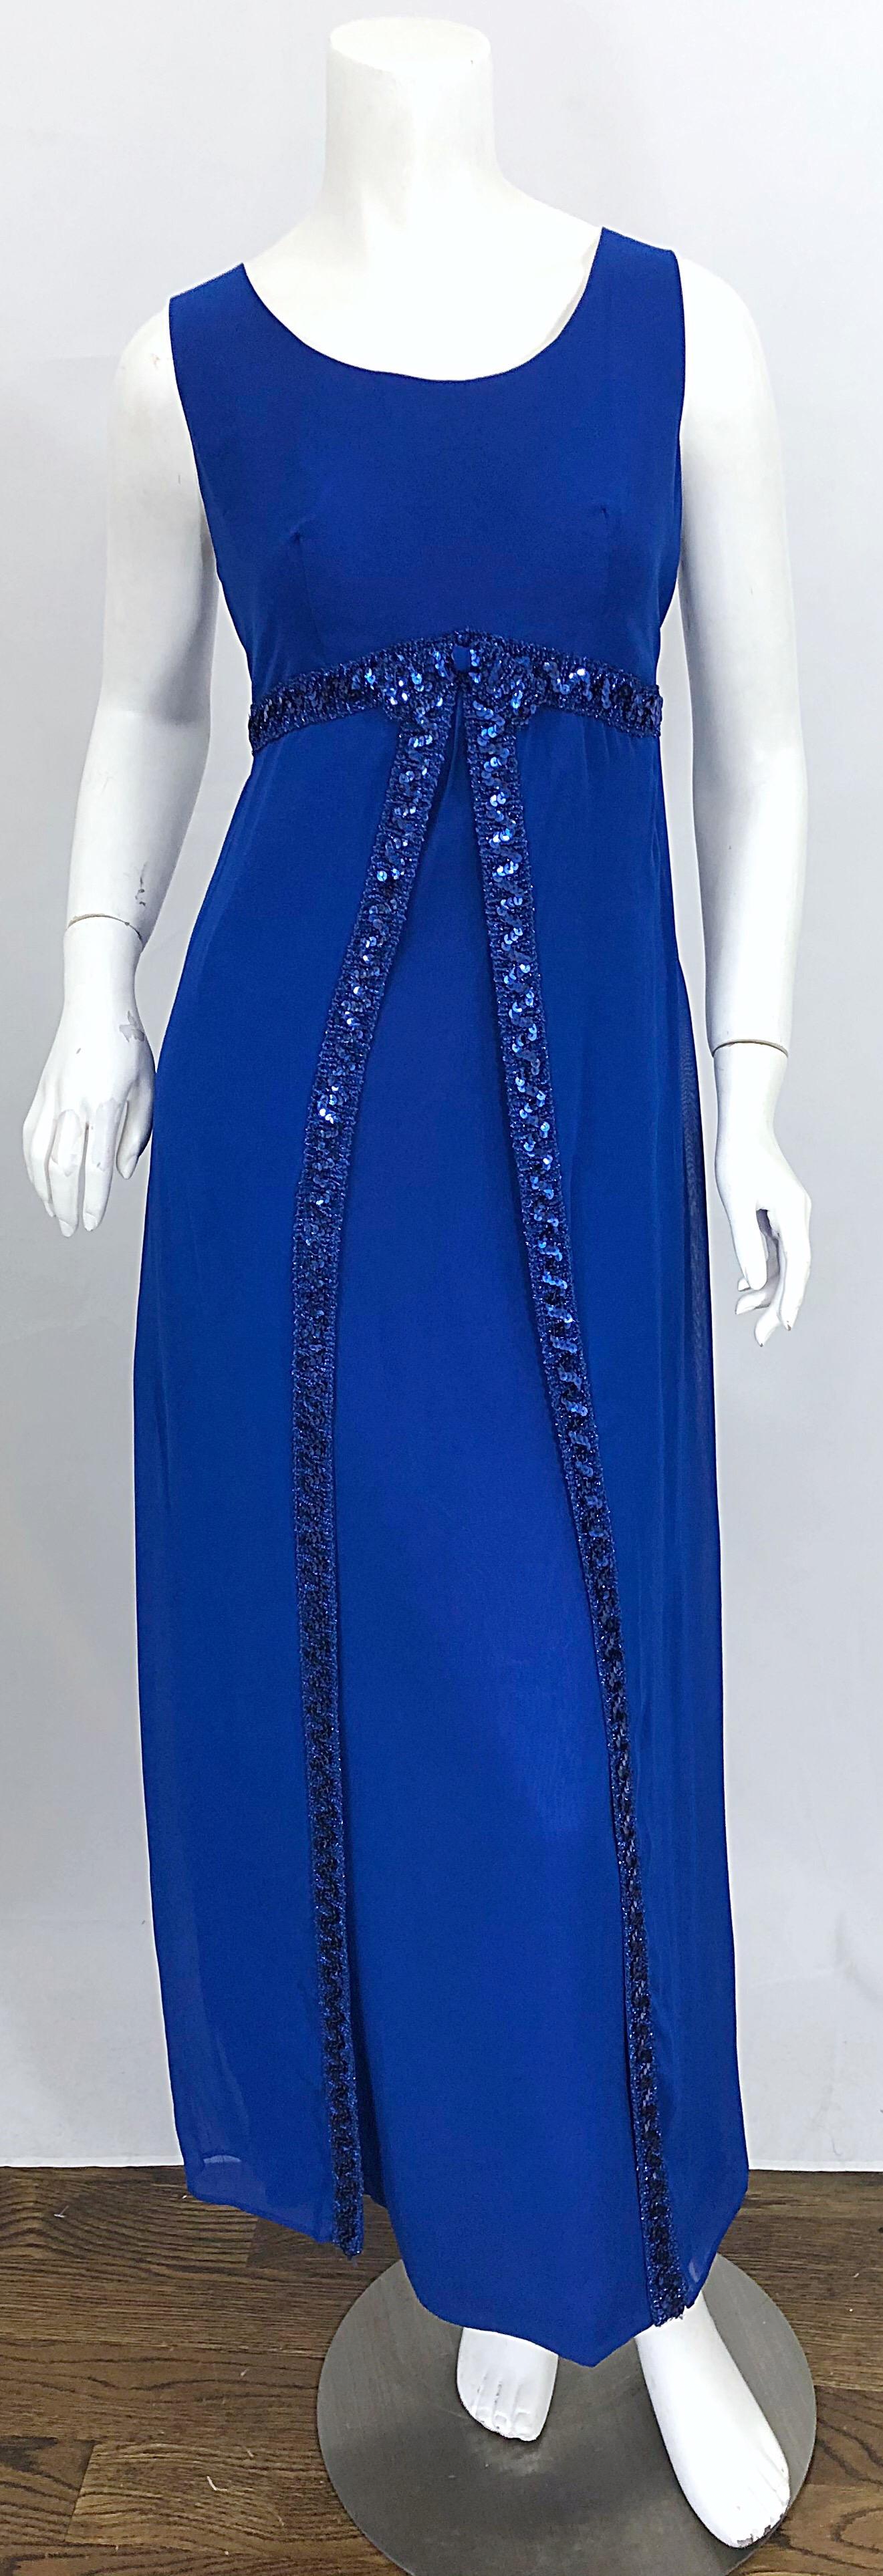 Beautiful 1960s CHARMONT MODEL by BURKEMAN & PASSES royal blue silk chiffon sequined gown! Features a tailored bodice, with a straight skirt and overlay. Hundreds of hand-sewn sequins under the bust and down the front center overlay. Full metal